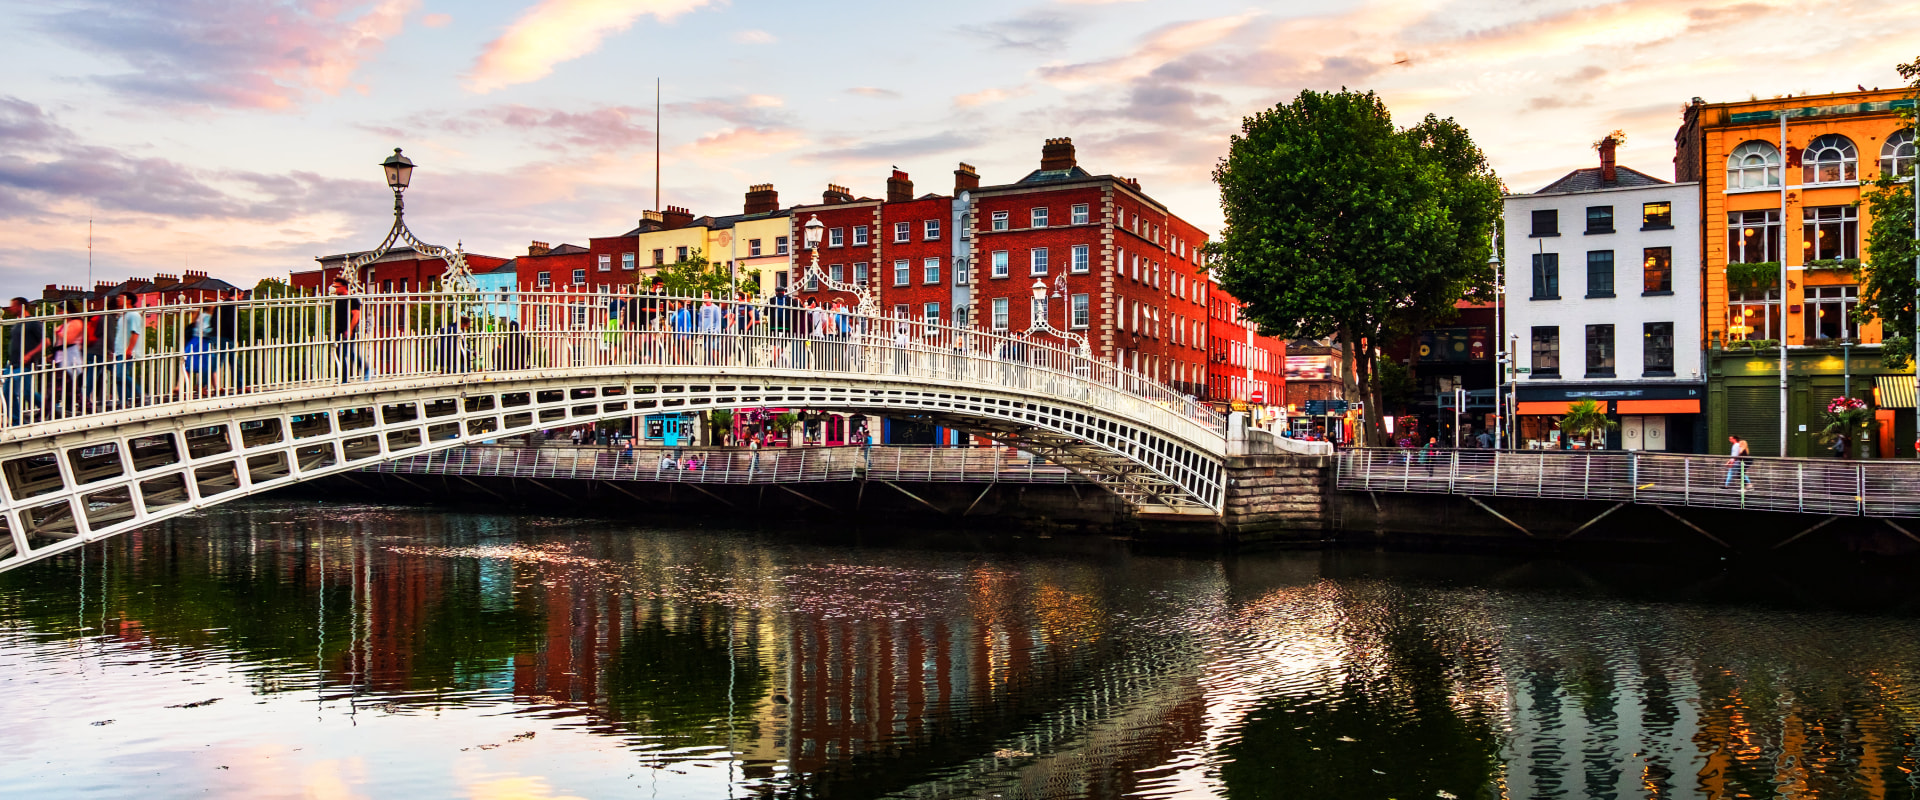 Is it a good idea to move to dublin?